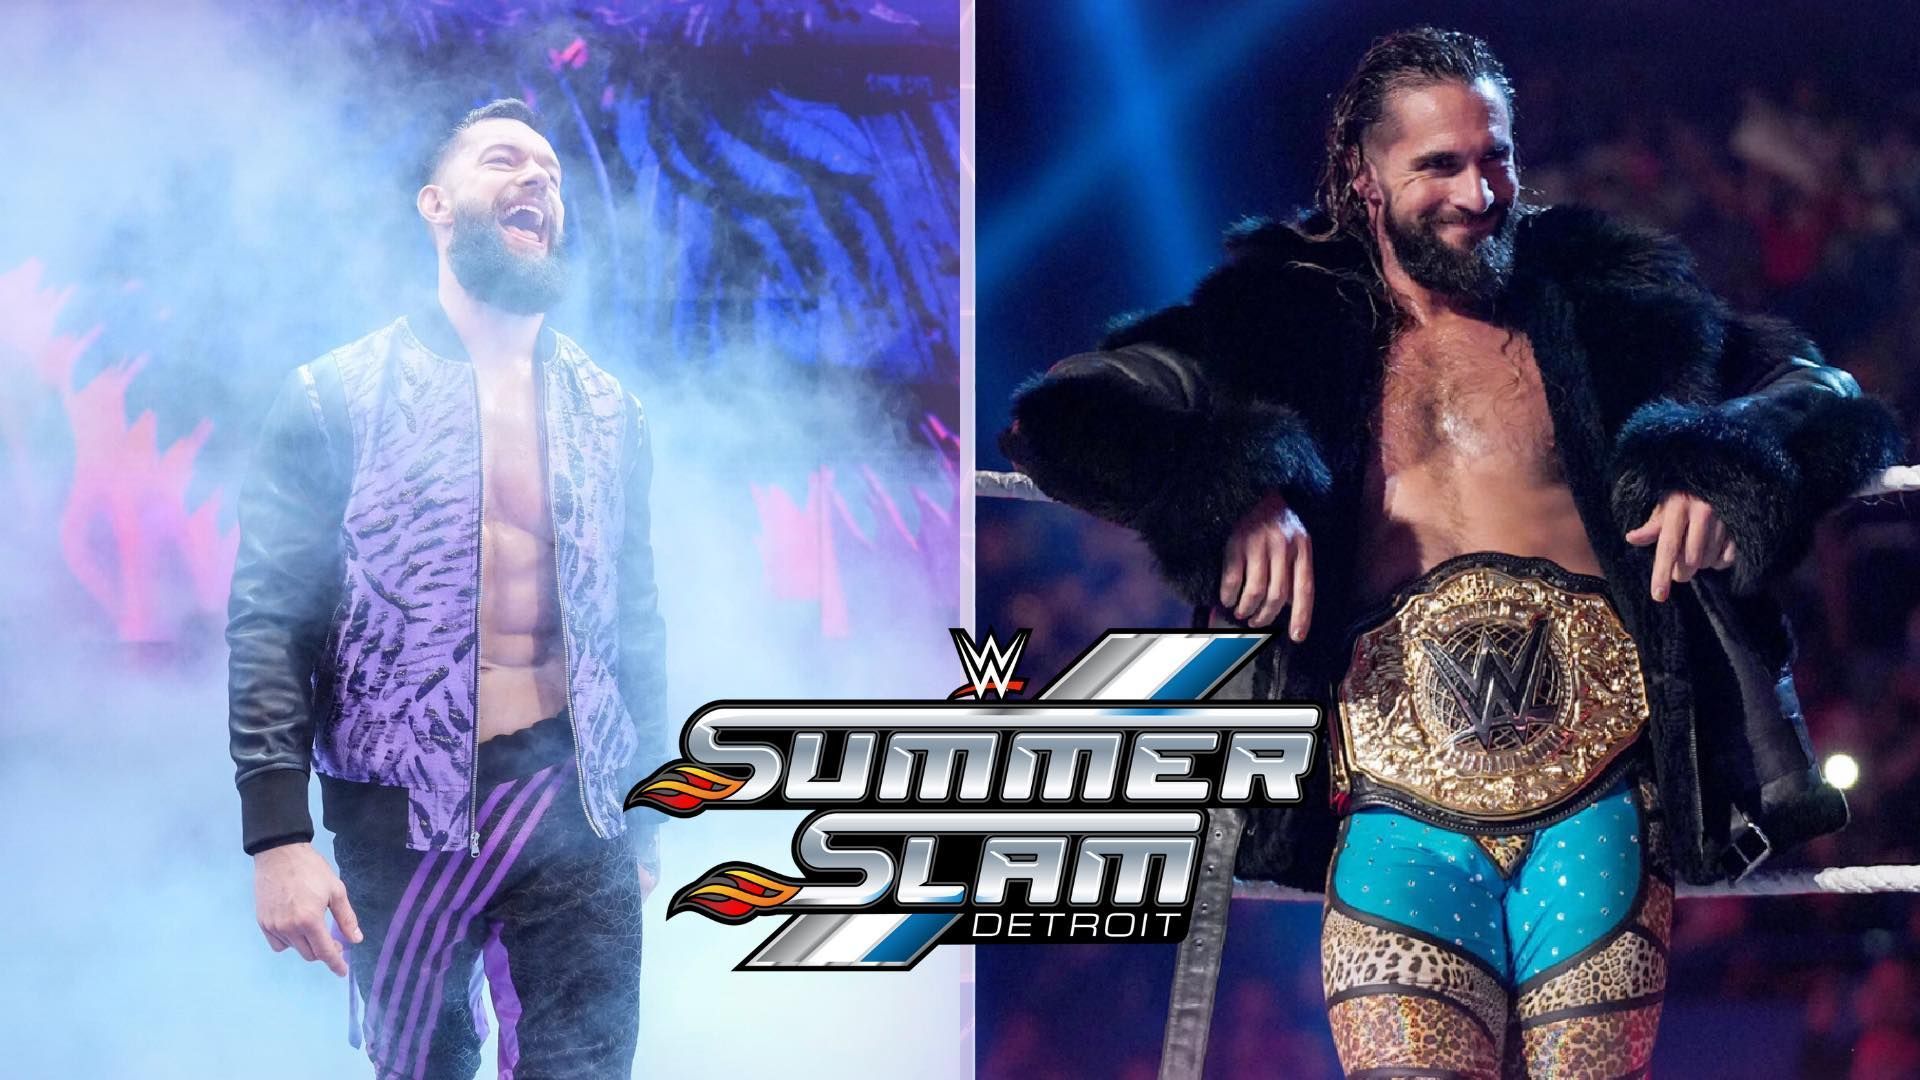 Finn Balor and Seth Rollins could be clashing one more time at WWE SummerSlam